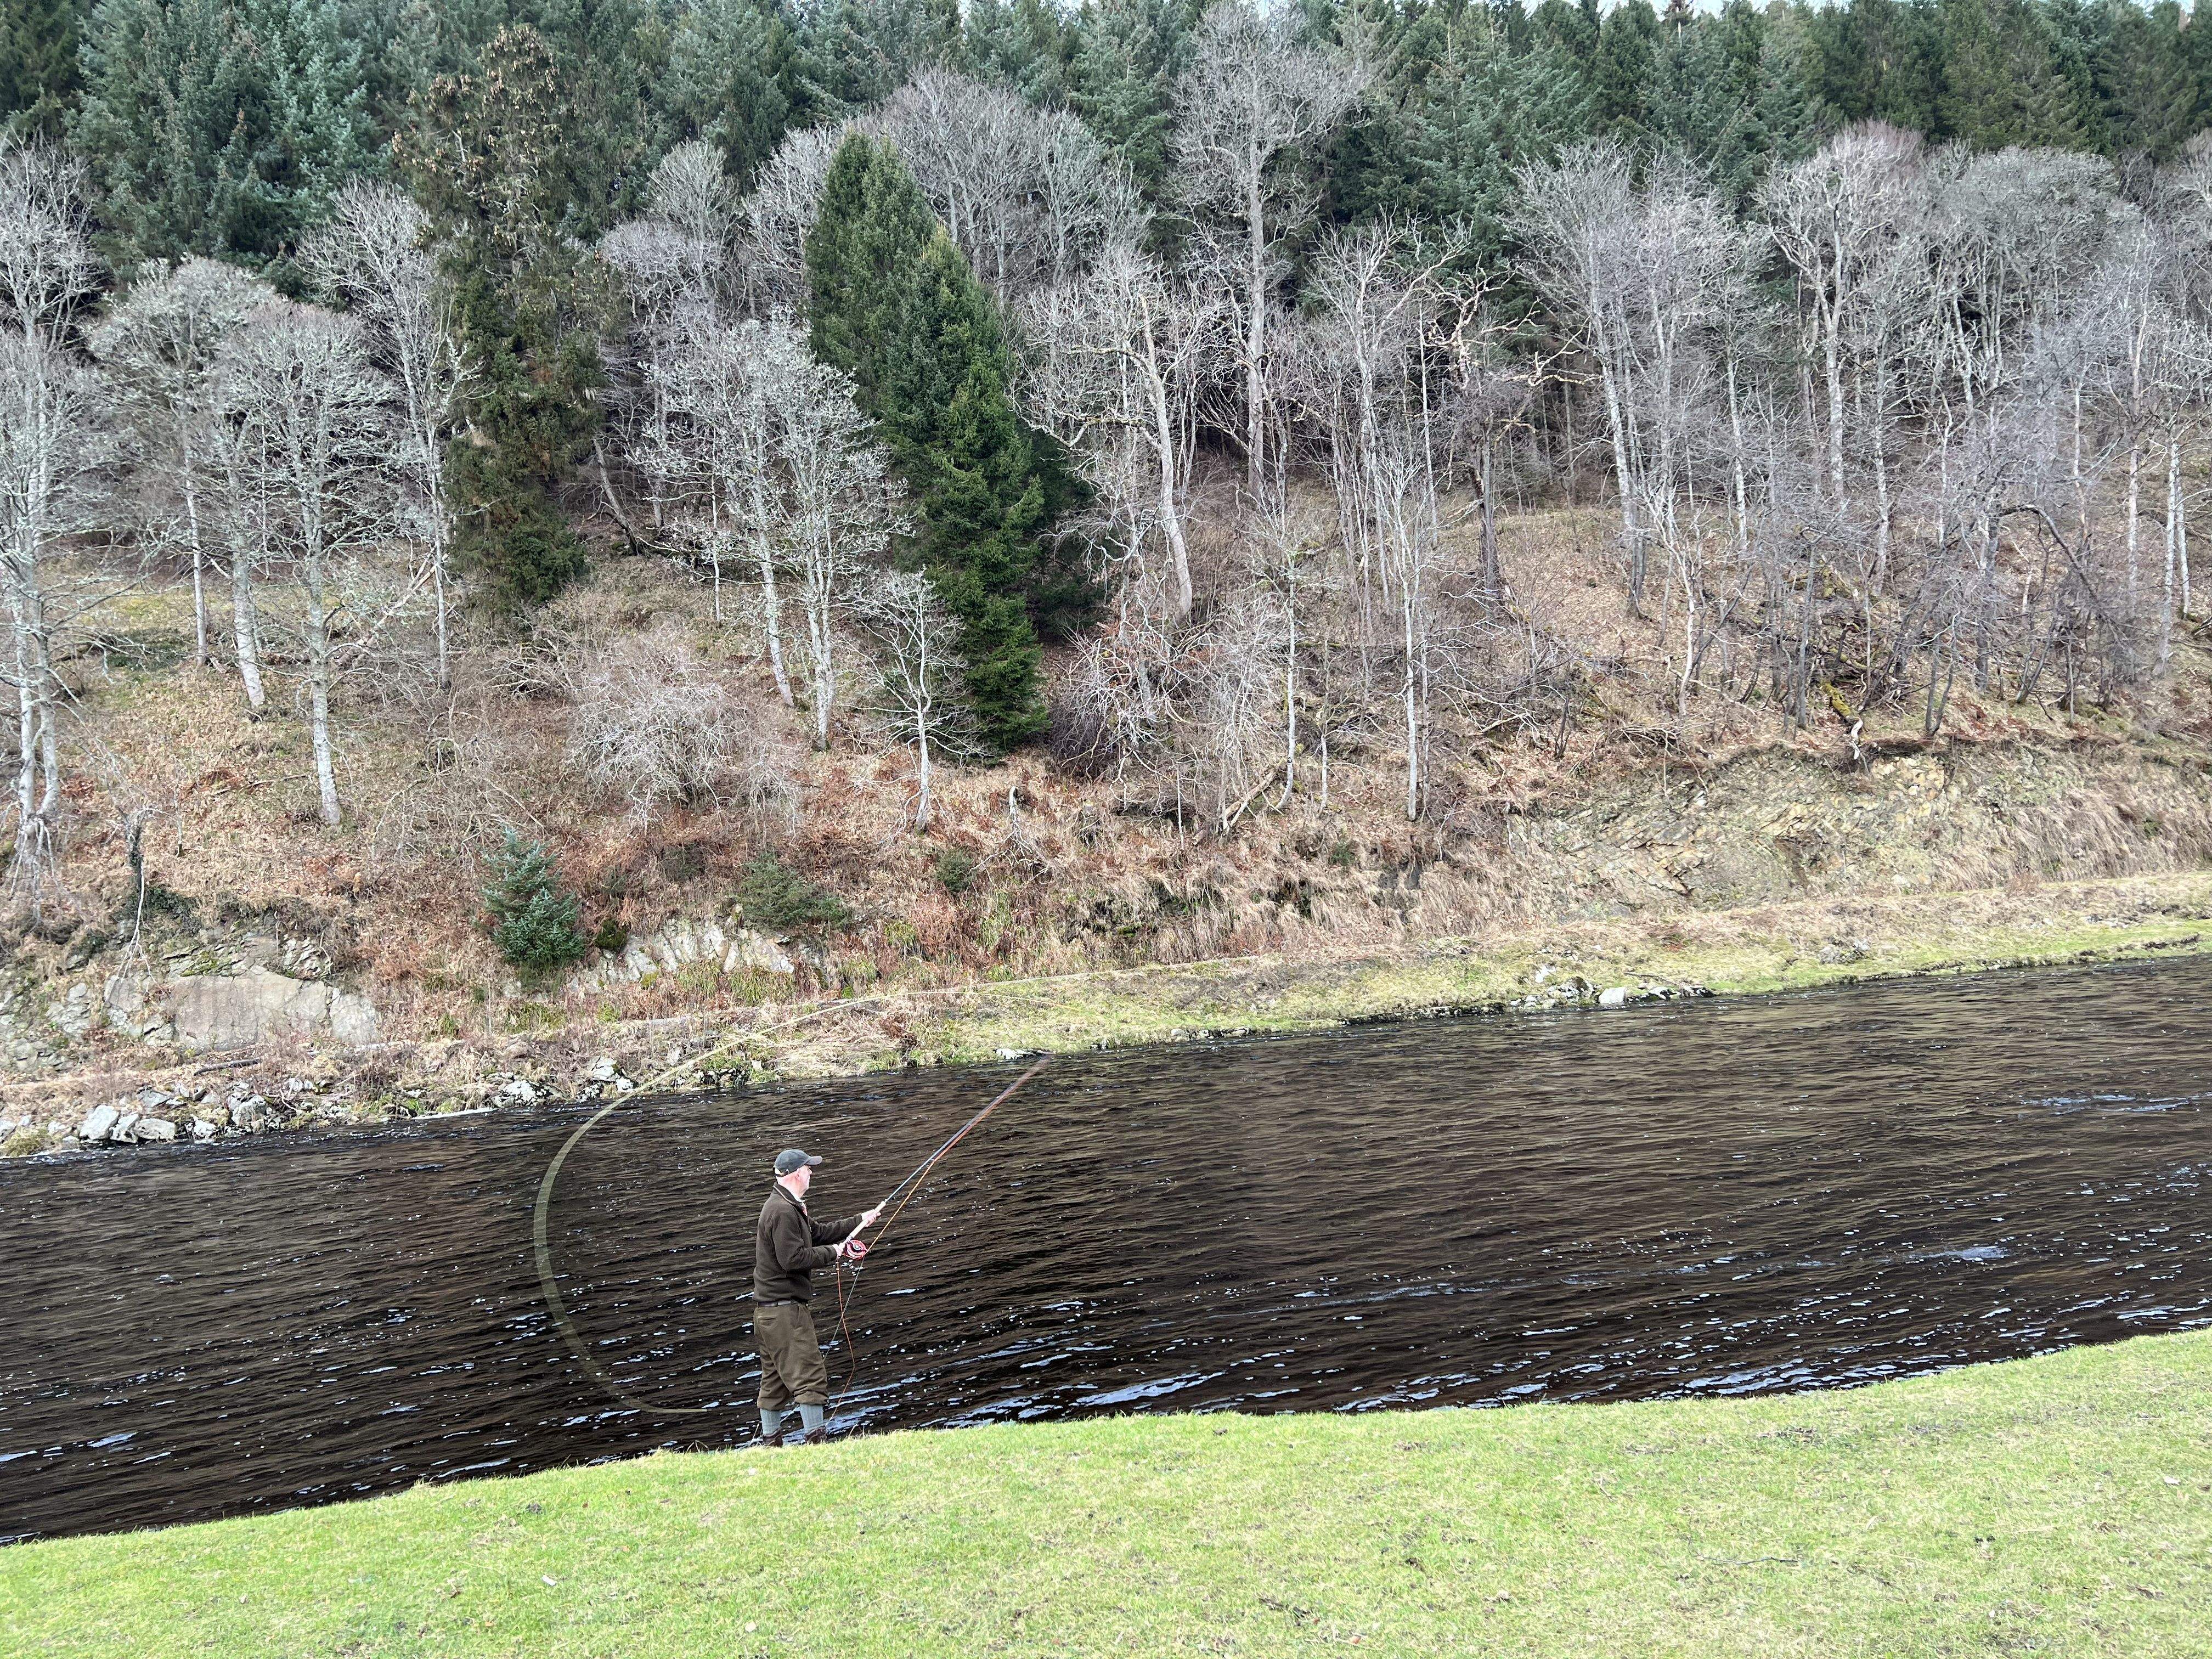 Fly Fishing in the river 2